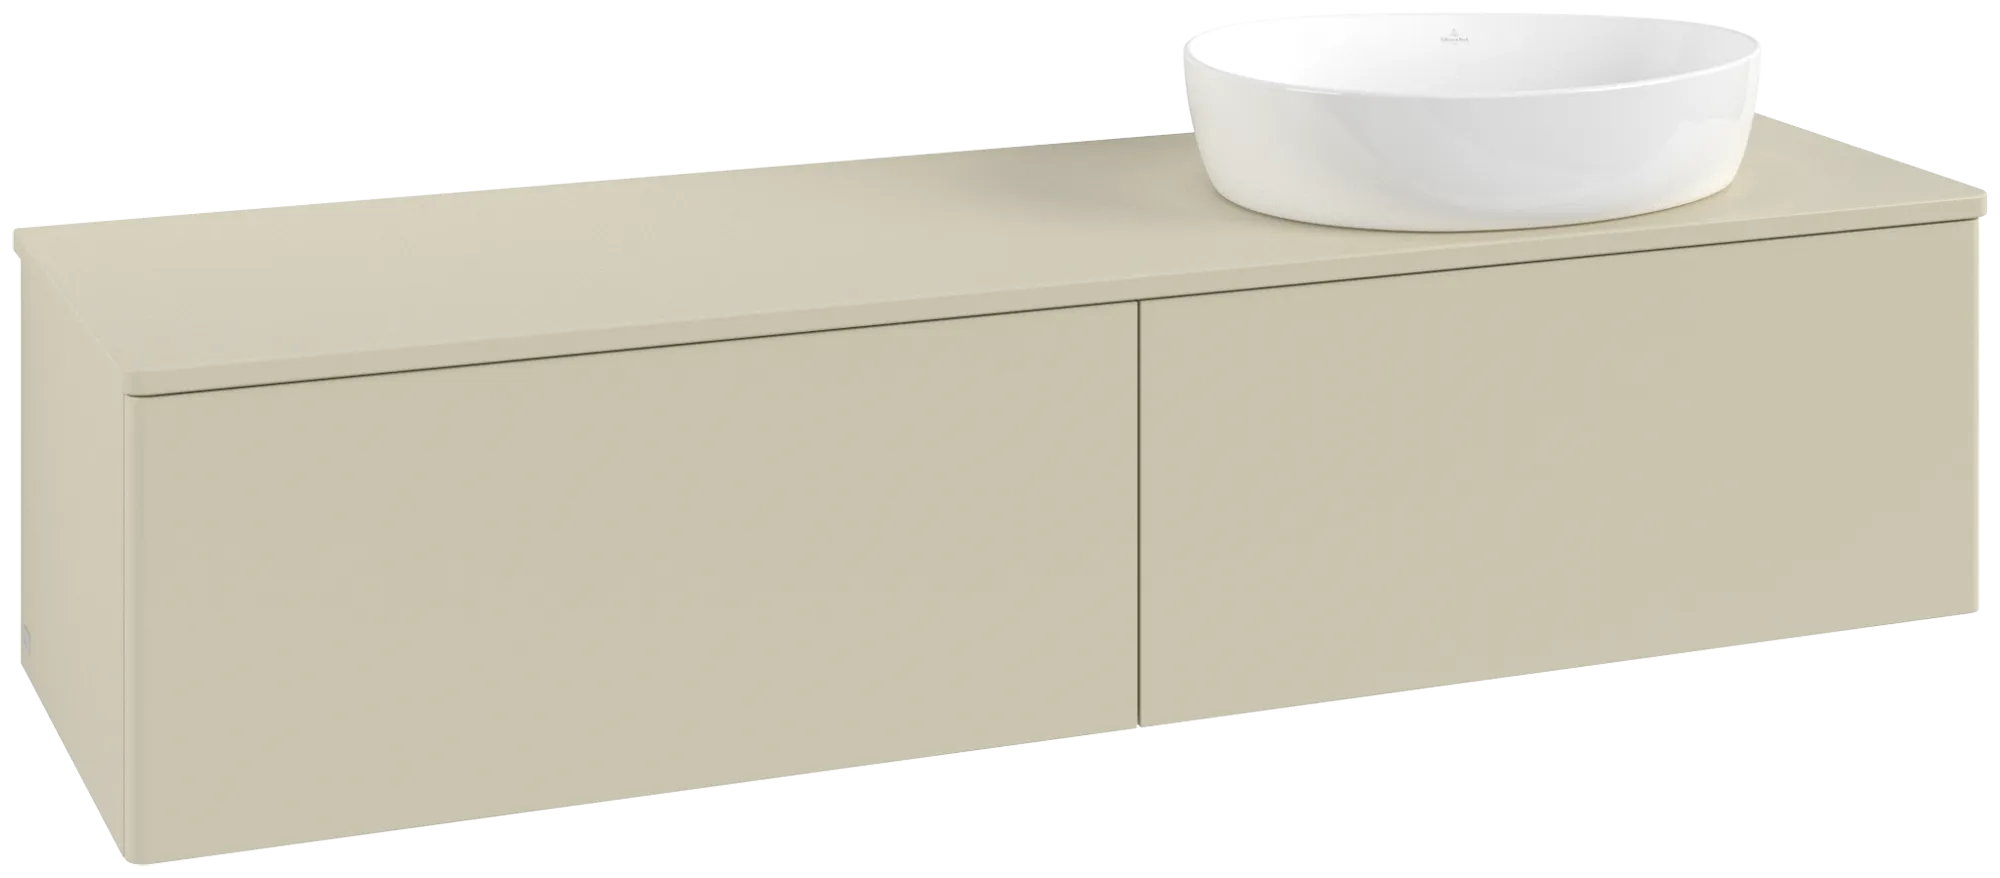 Picture of VILLEROY BOCH Antao Vanity unit, 2 pull-out compartments, 1600 x 360 x 500 mm, Front without structure, Silk Grey Matt Lacquer / Silk Grey Matt Lacquer #K38050HJ